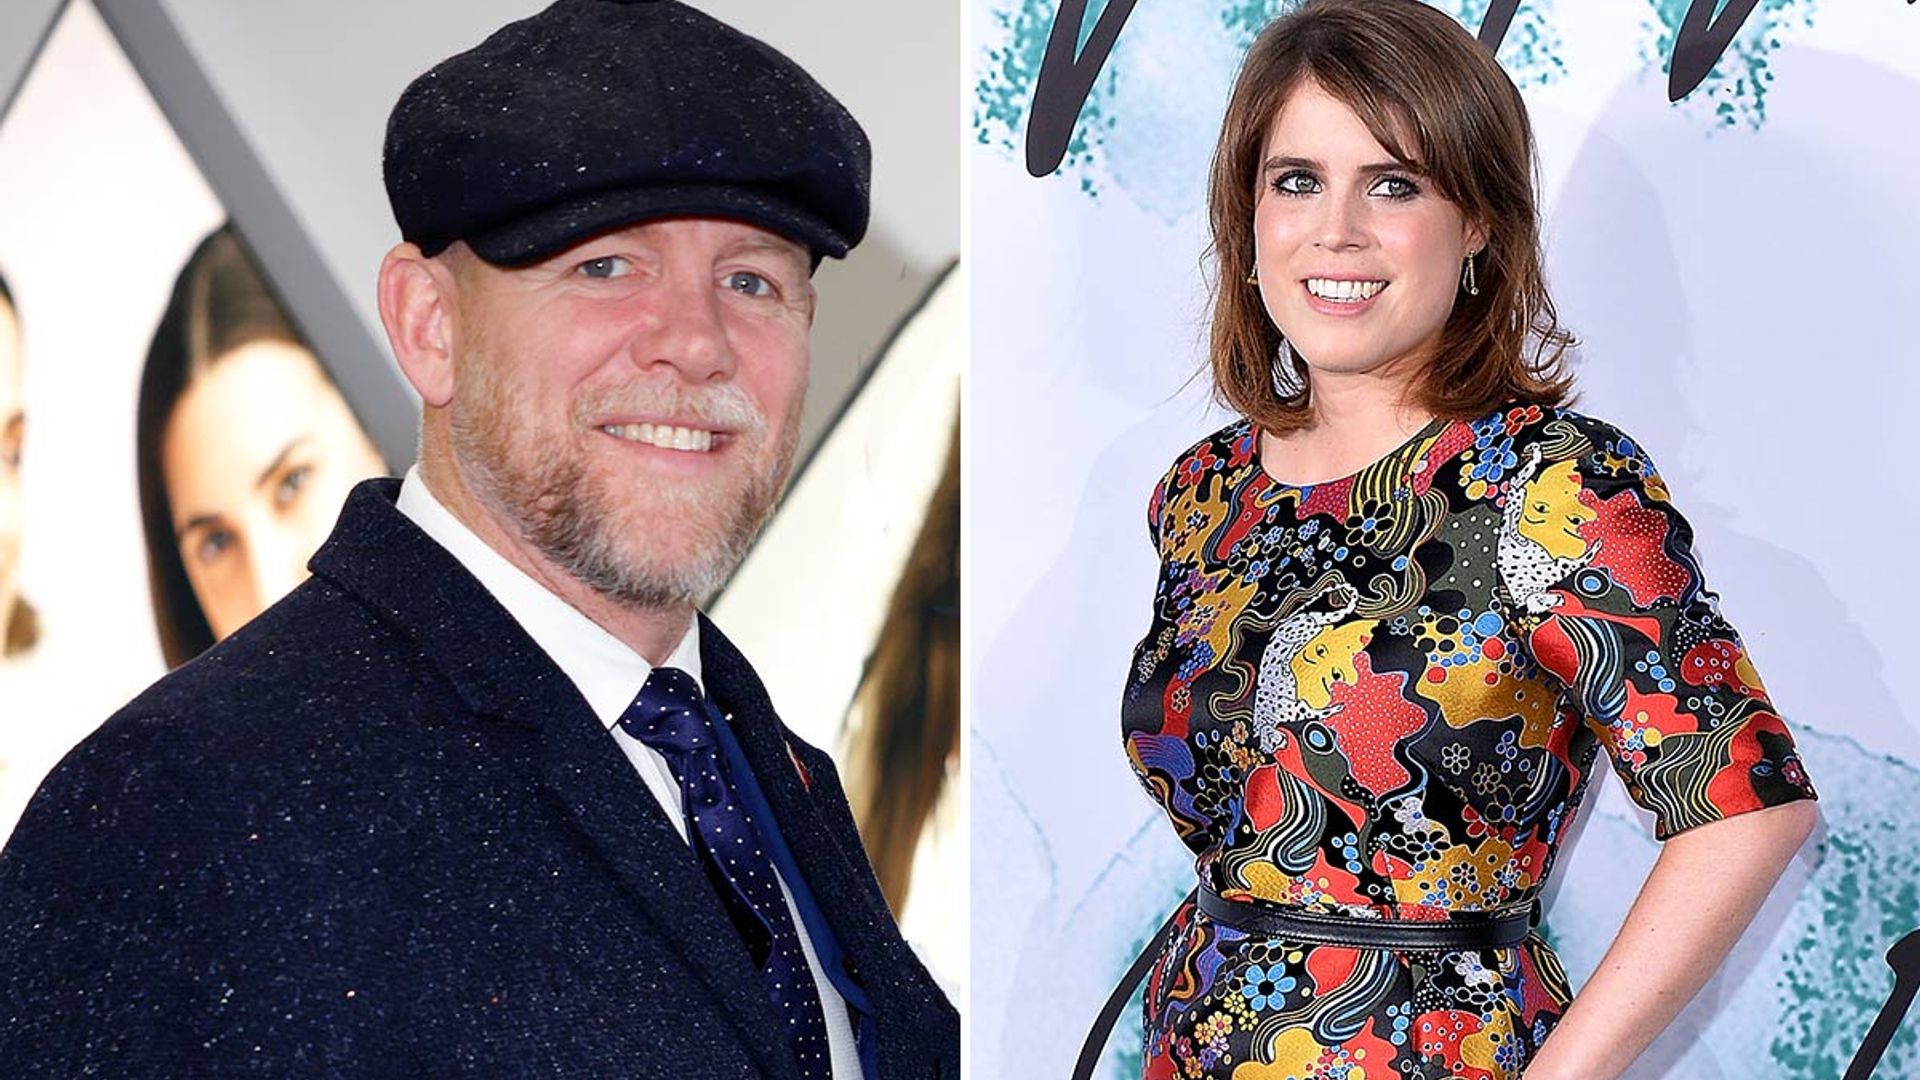 The surprising connection between Princess Eugenie and Mike Tindall's podcasts